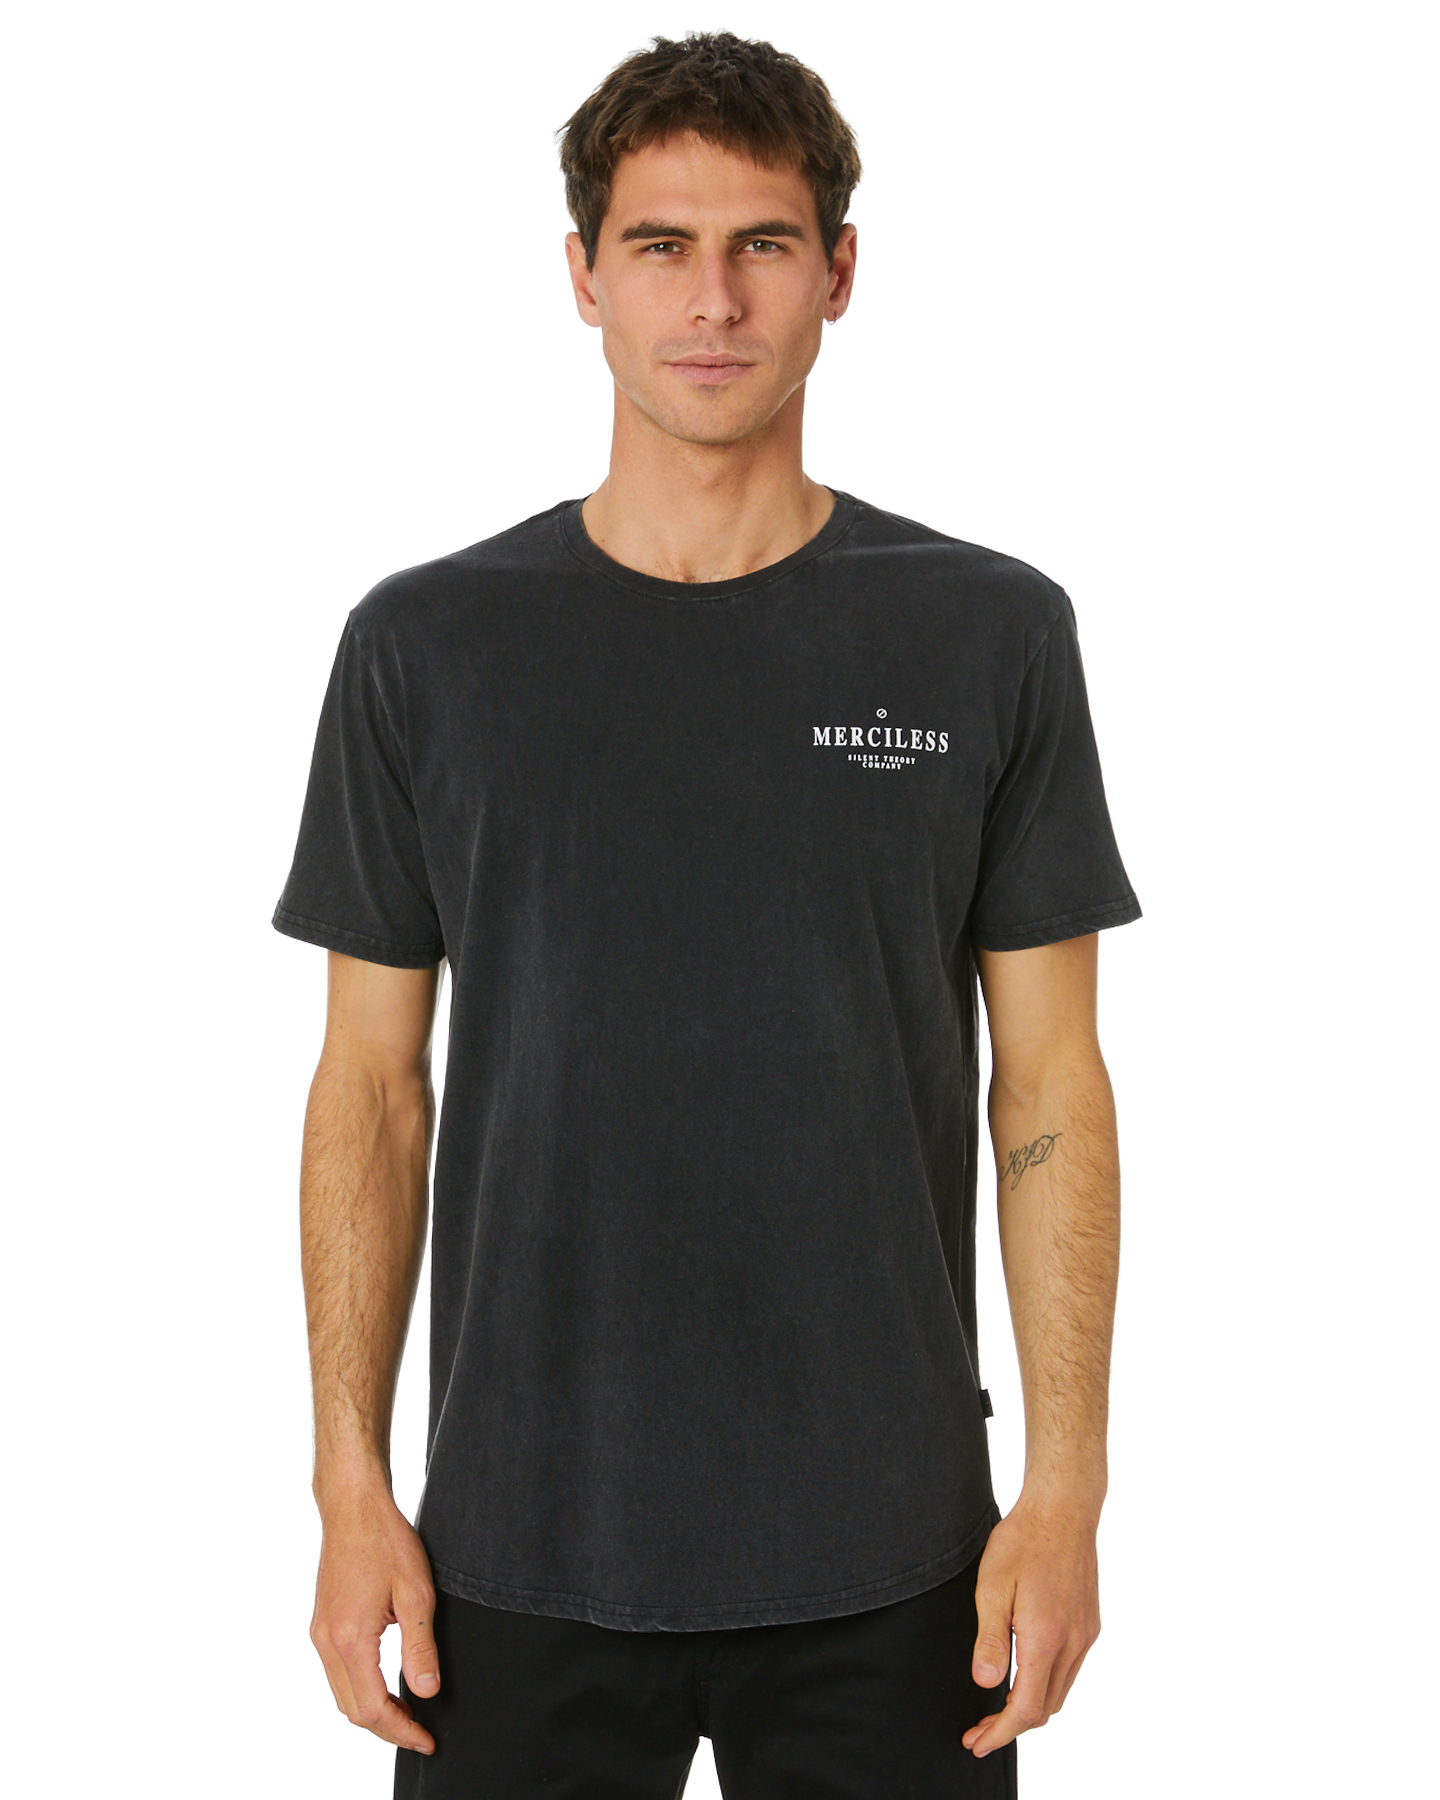 Silent Theory Merciless Mens Tee - Washed Black | SurfStitch